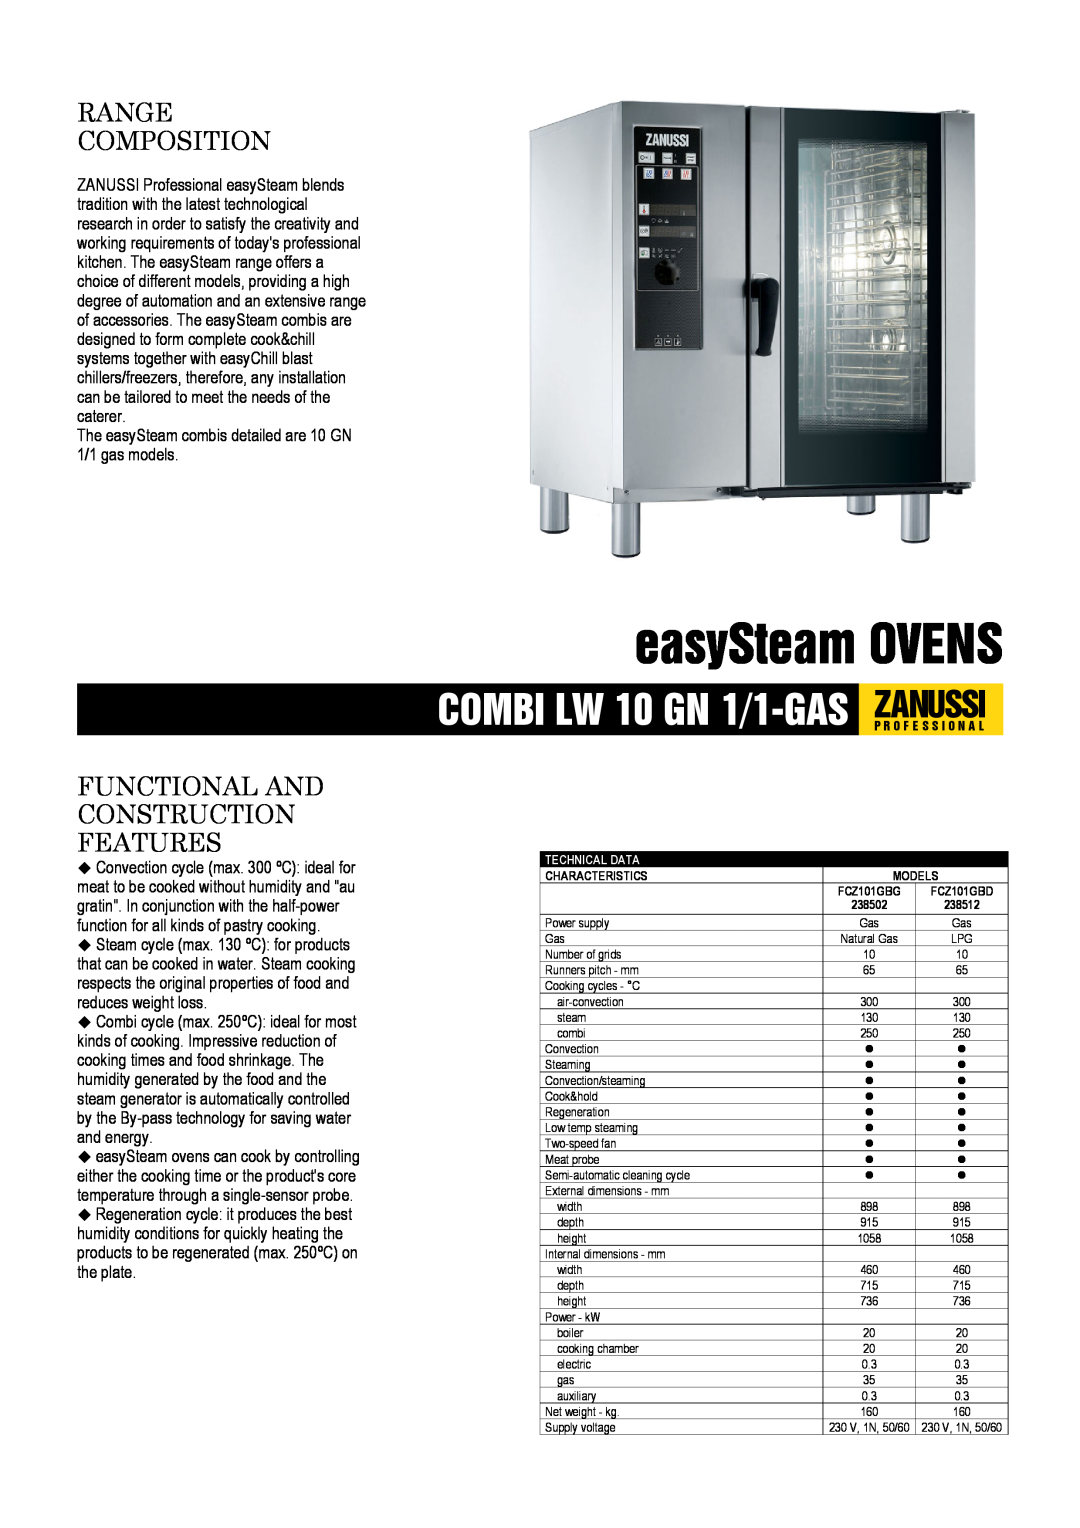 Zanussi 238502, 238512, FCZ101GBG dimensions easySteam OVENS, Range Composition, Functional And Construction Features 